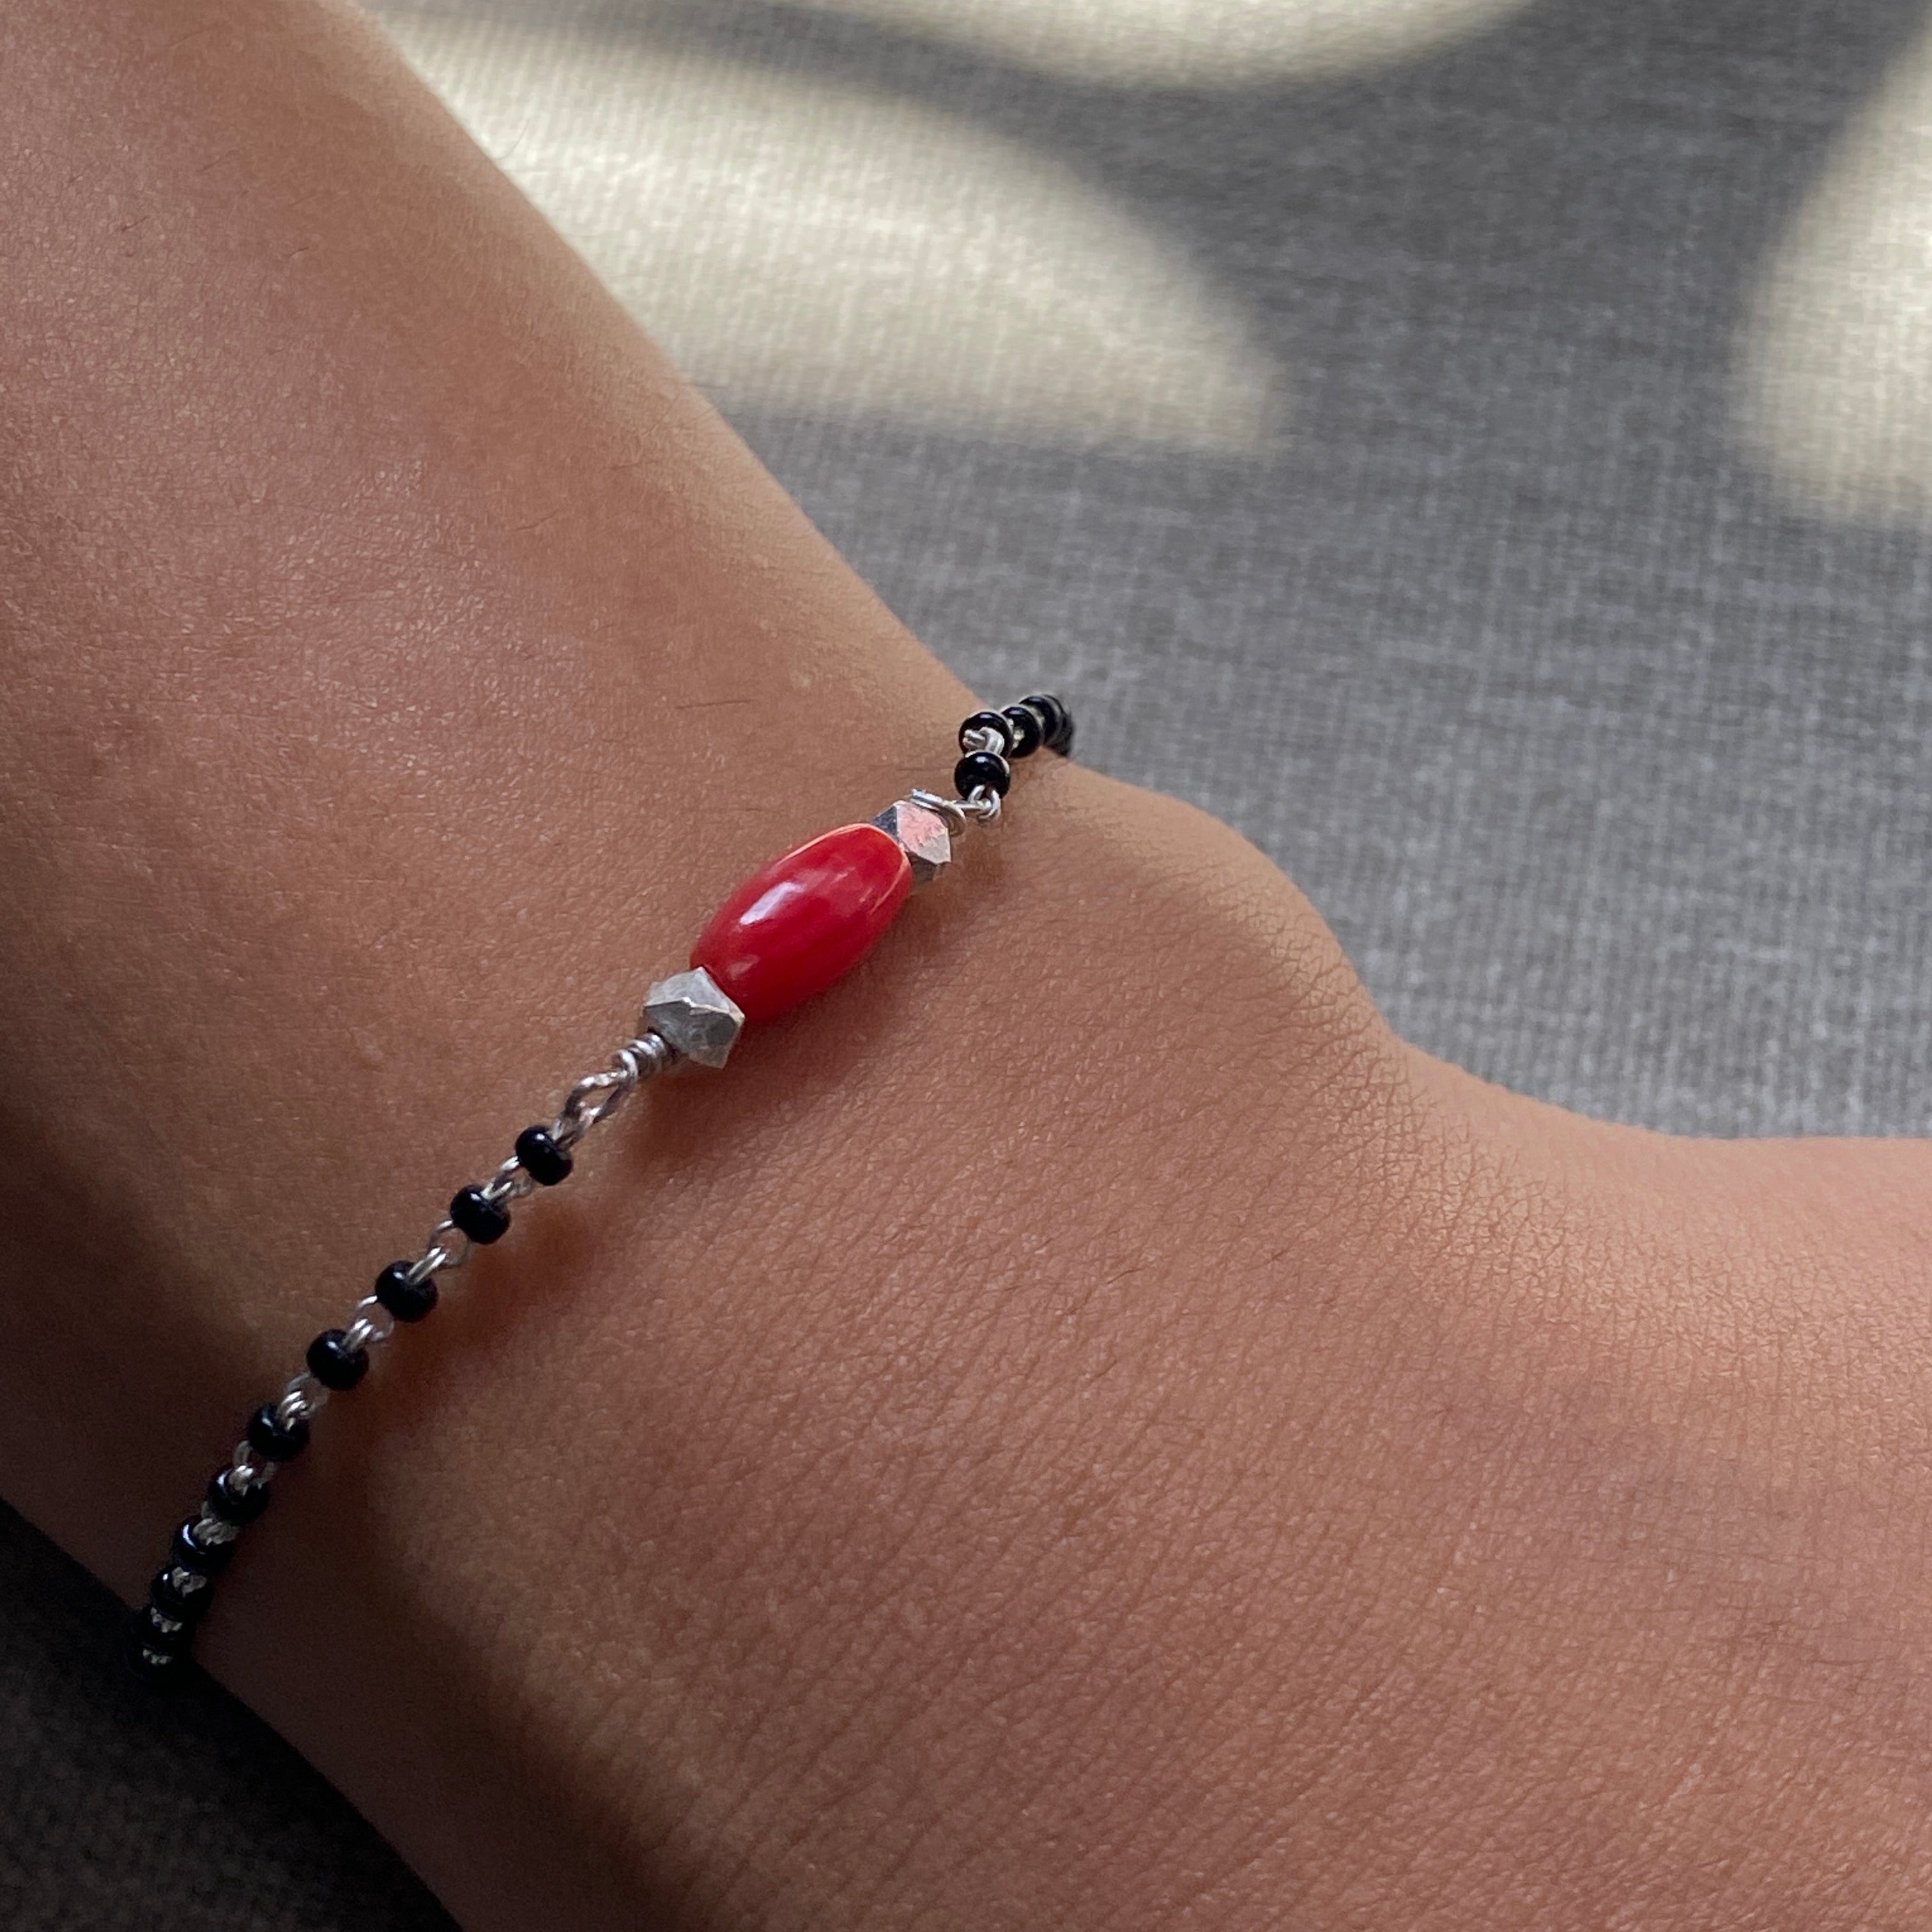 a woman's arm with a red beaded bracelet